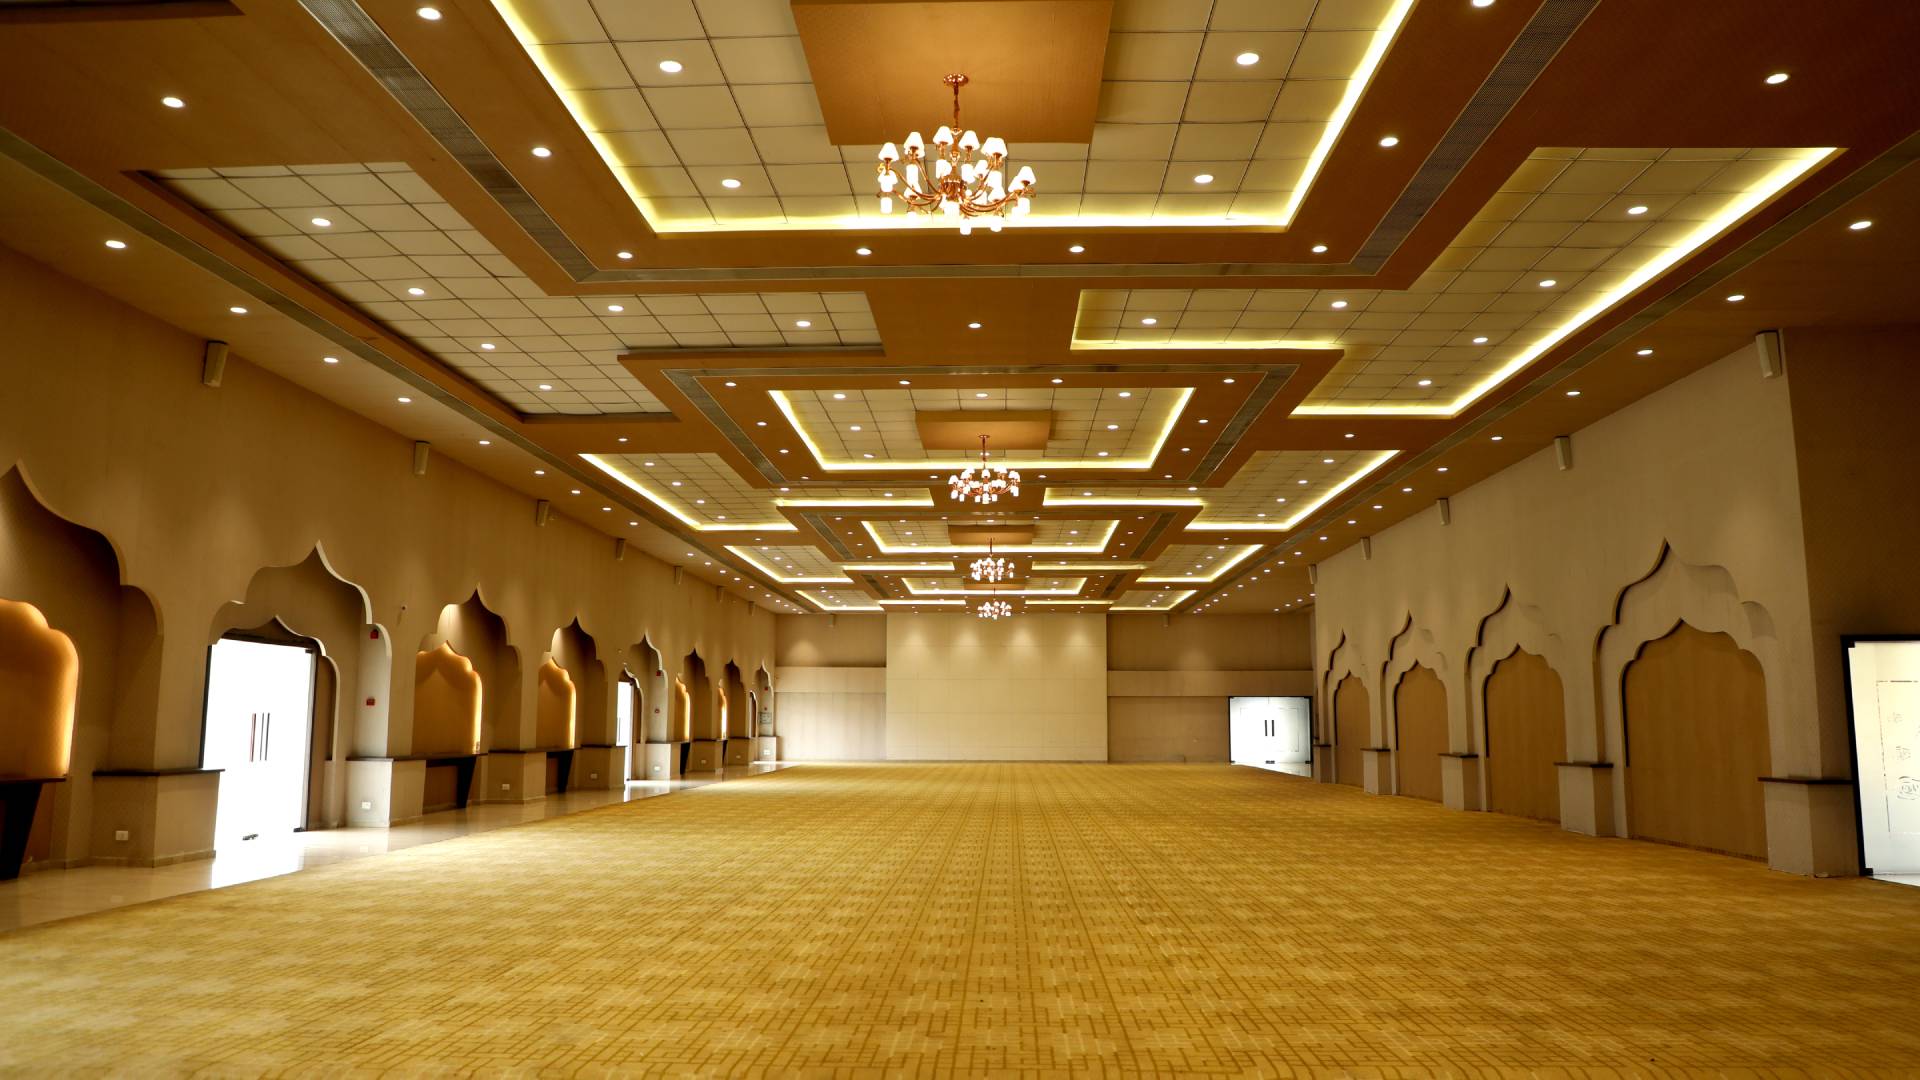 The Kohinoor - Ac Banquet Hall at Sunny's World Pune (10)